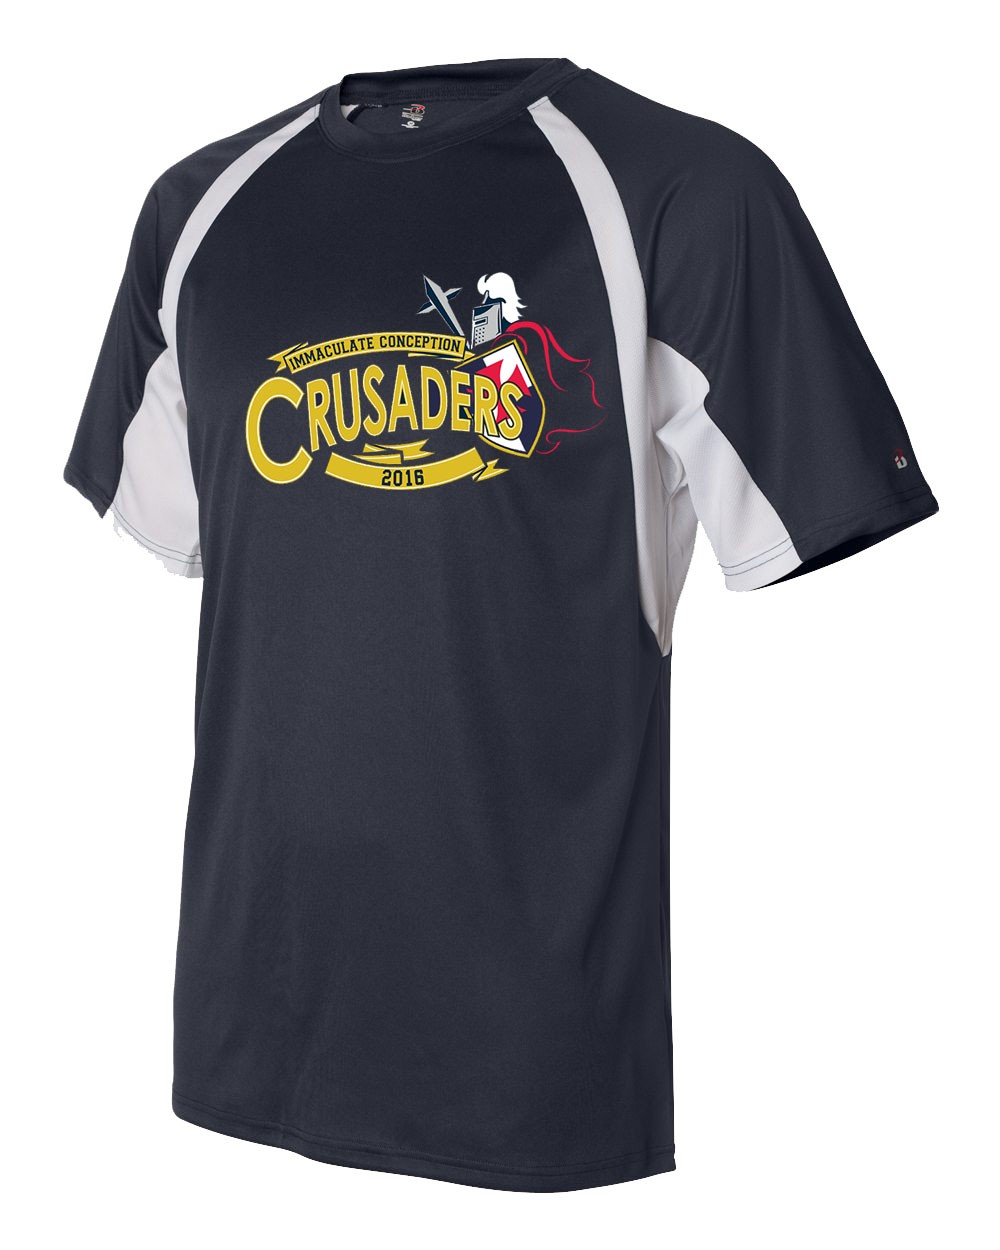 Team ICS Softball Jersey w/ Crusader Logo - Please Allow 2-3 Weeks For Delivery 